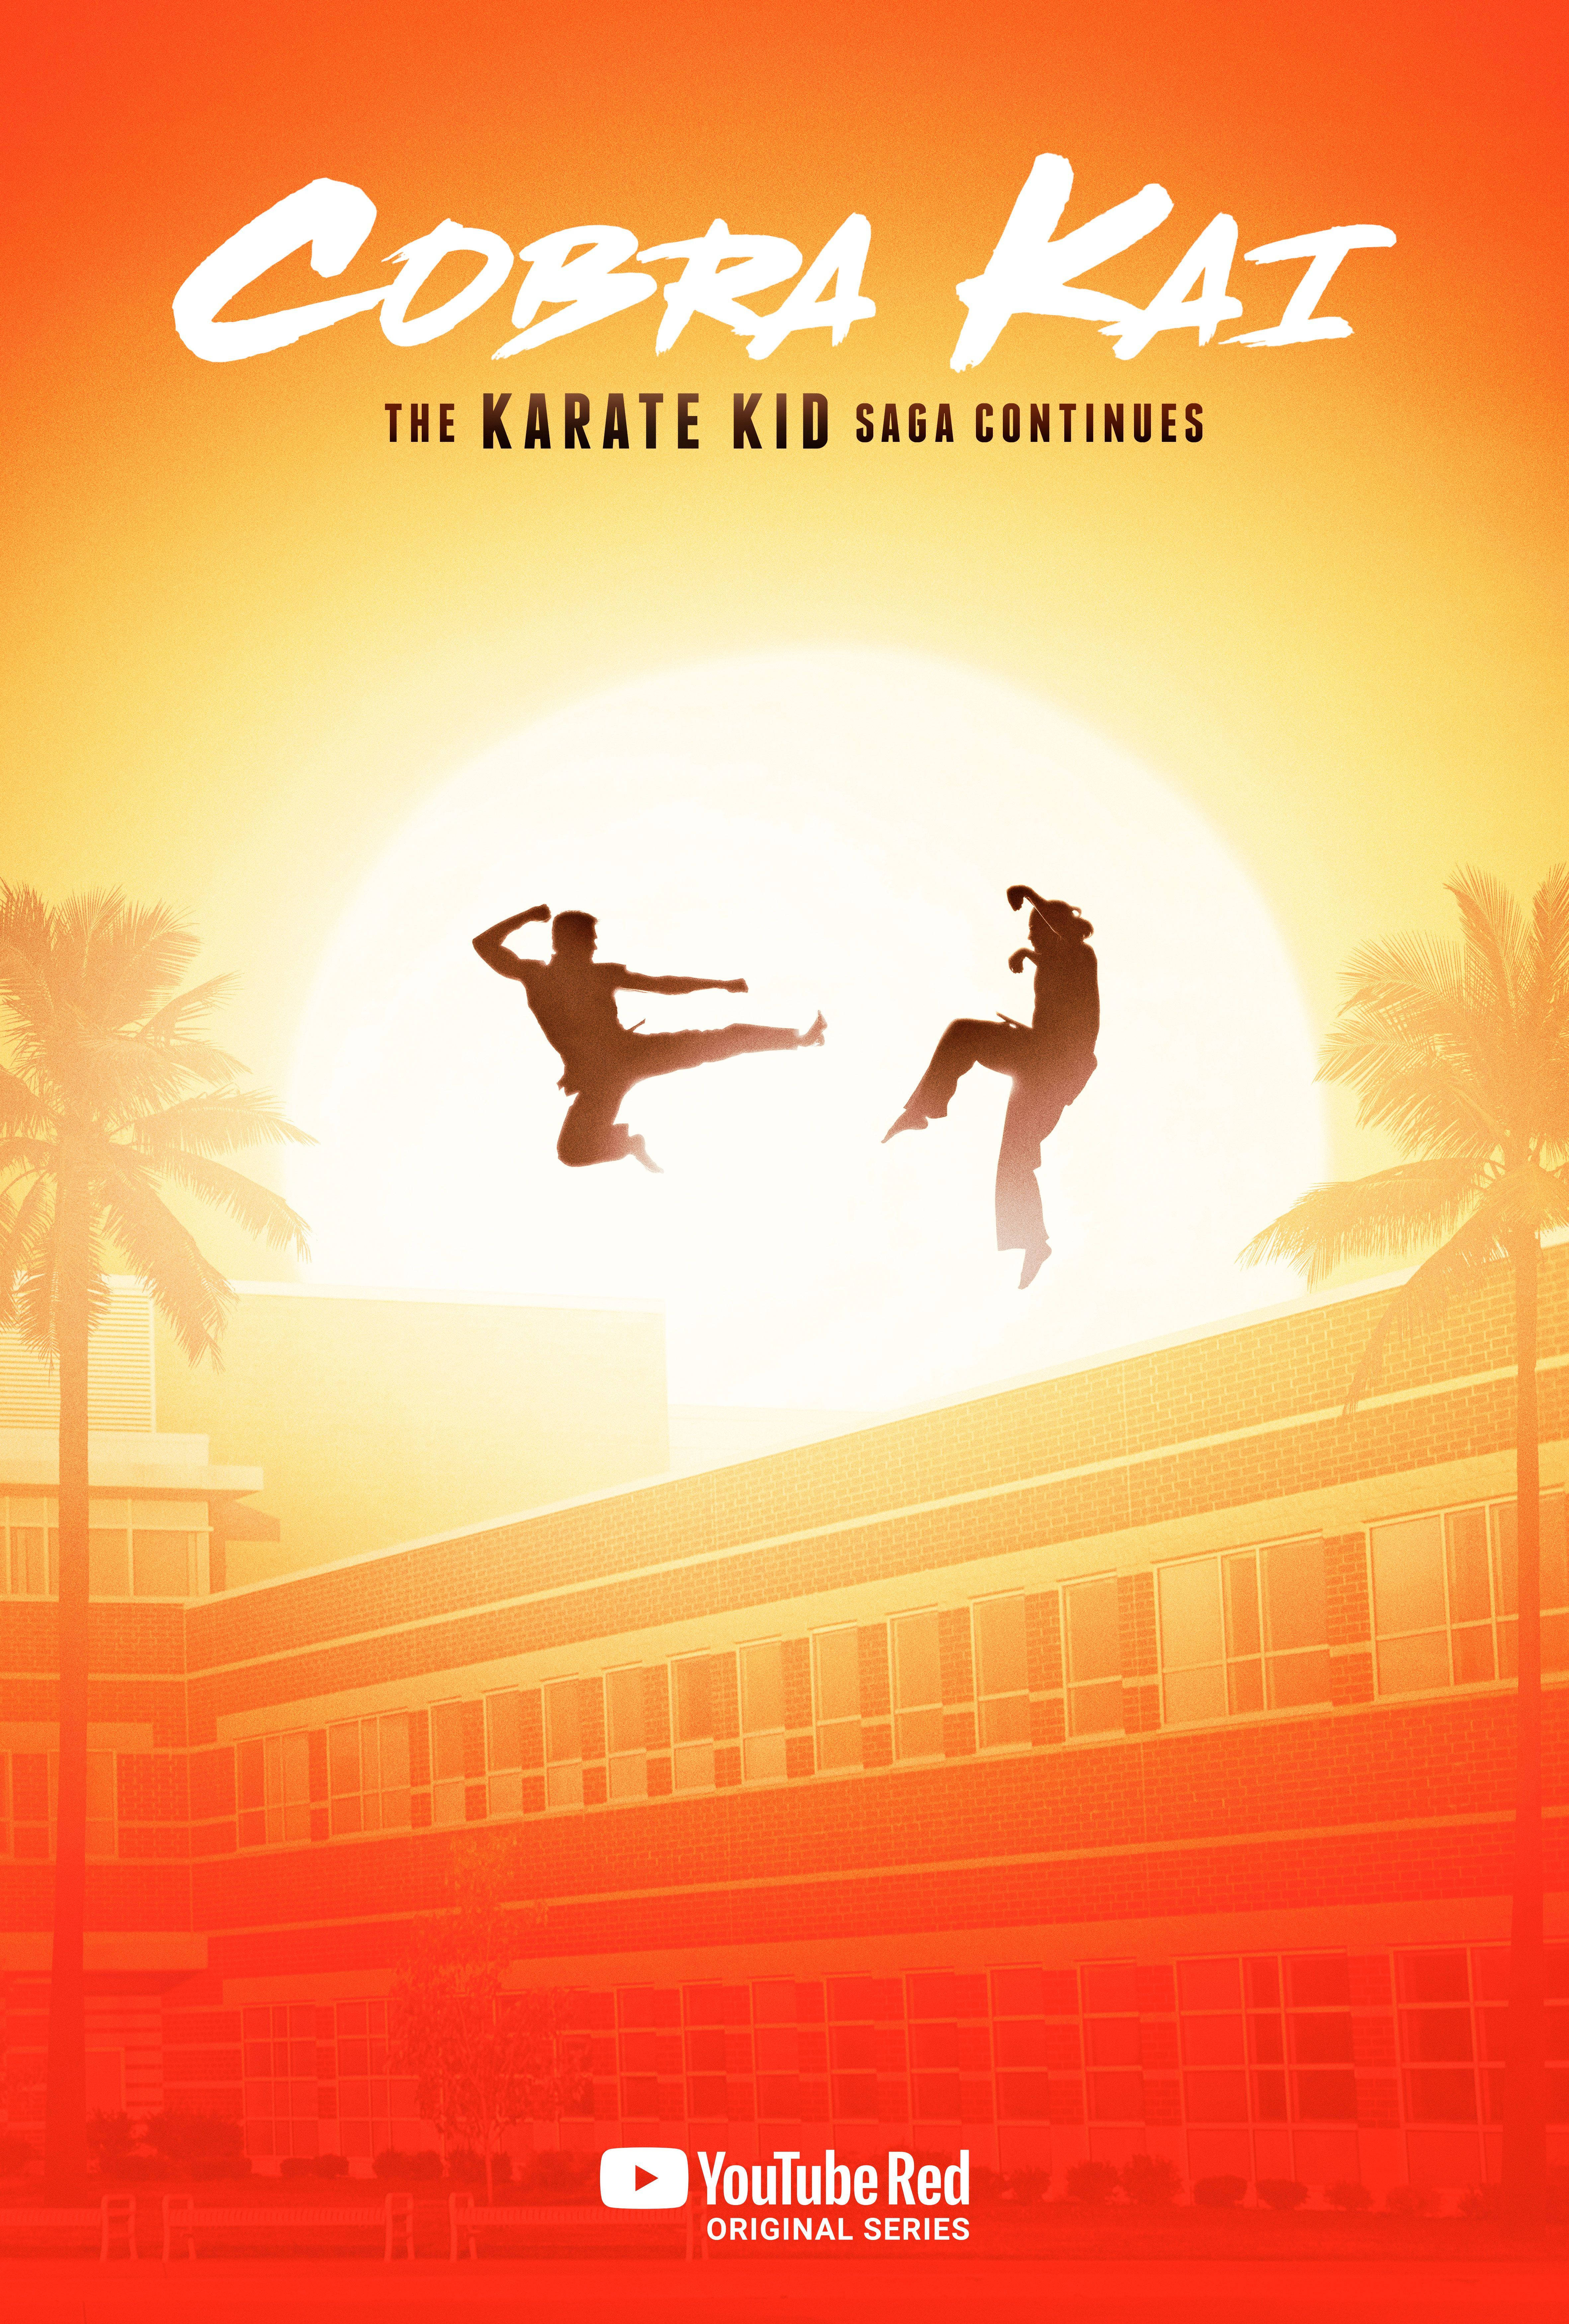 Download Strike first and strike hard against enemies in the shadows with Cobra Kai. Wallpaper